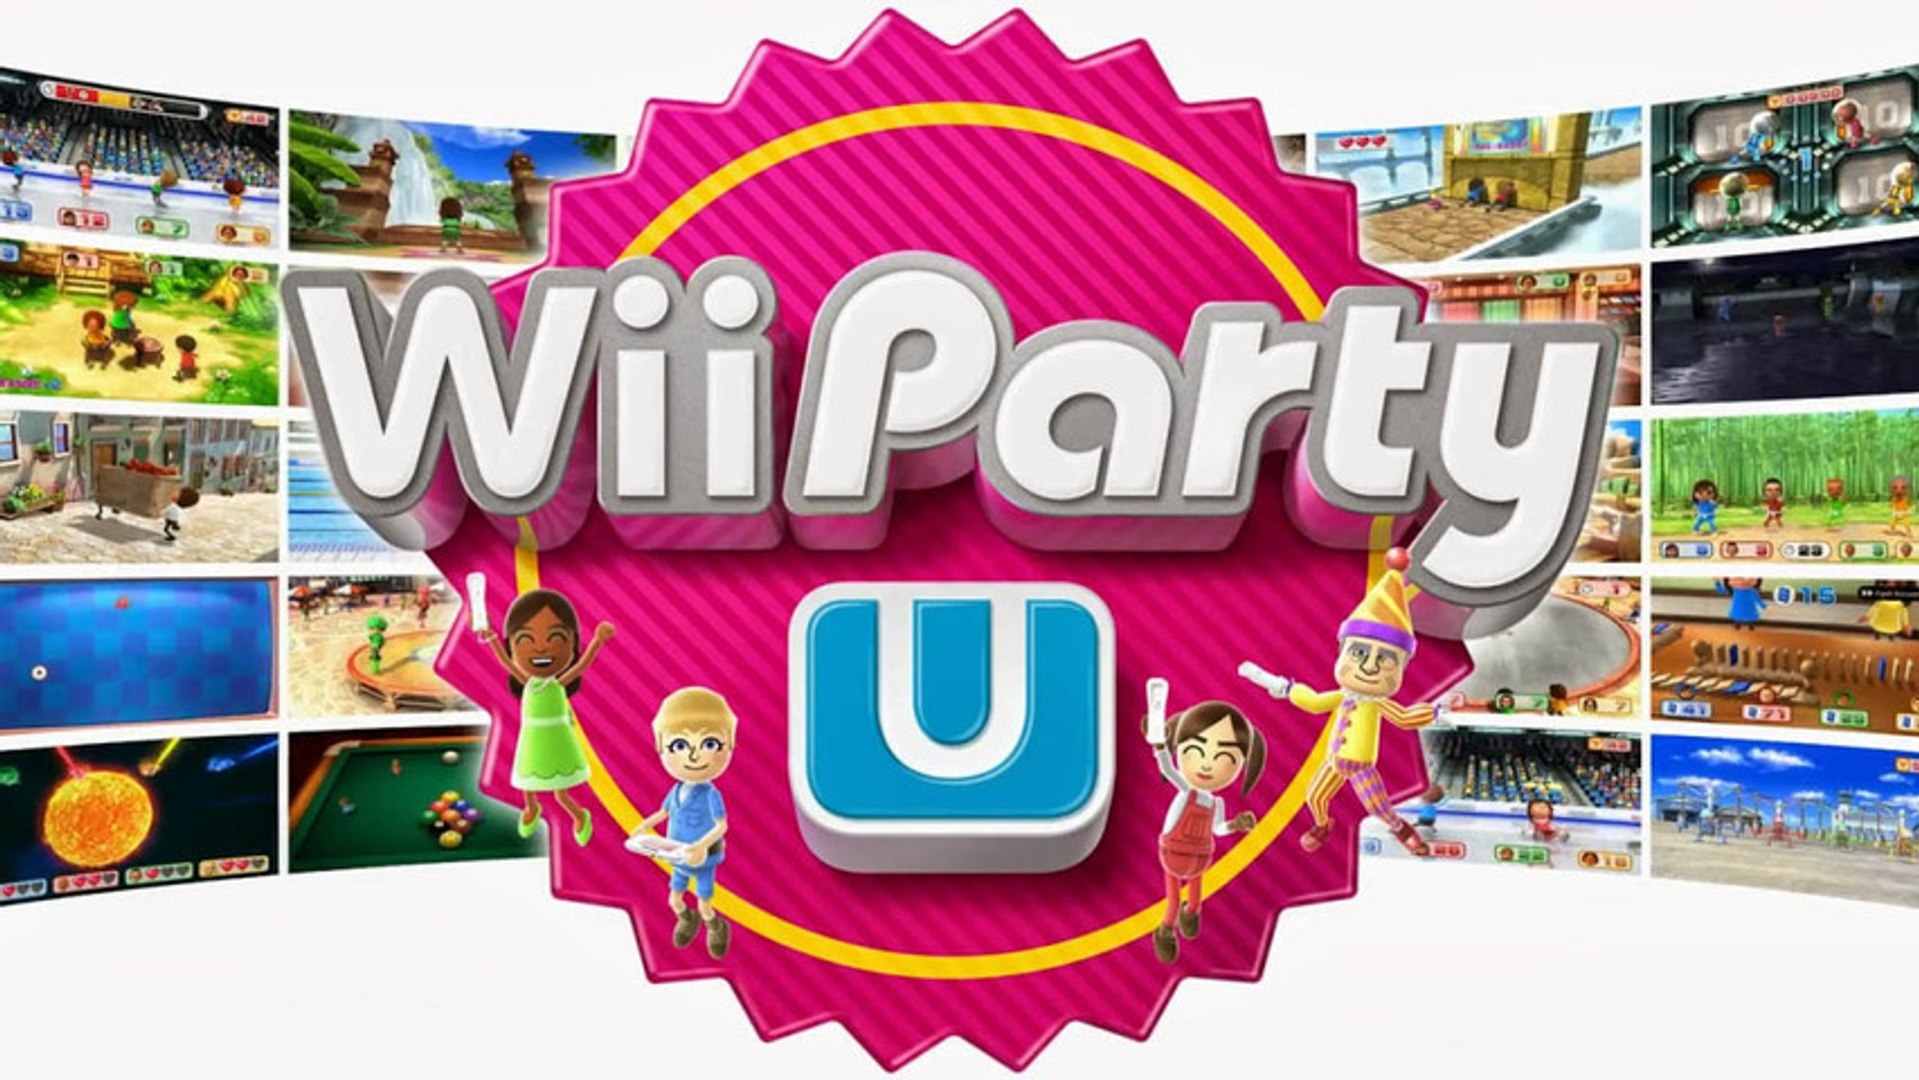 CGR Undertow - Wii PARTY U review for Nintendo Wii U - video Dailymotion